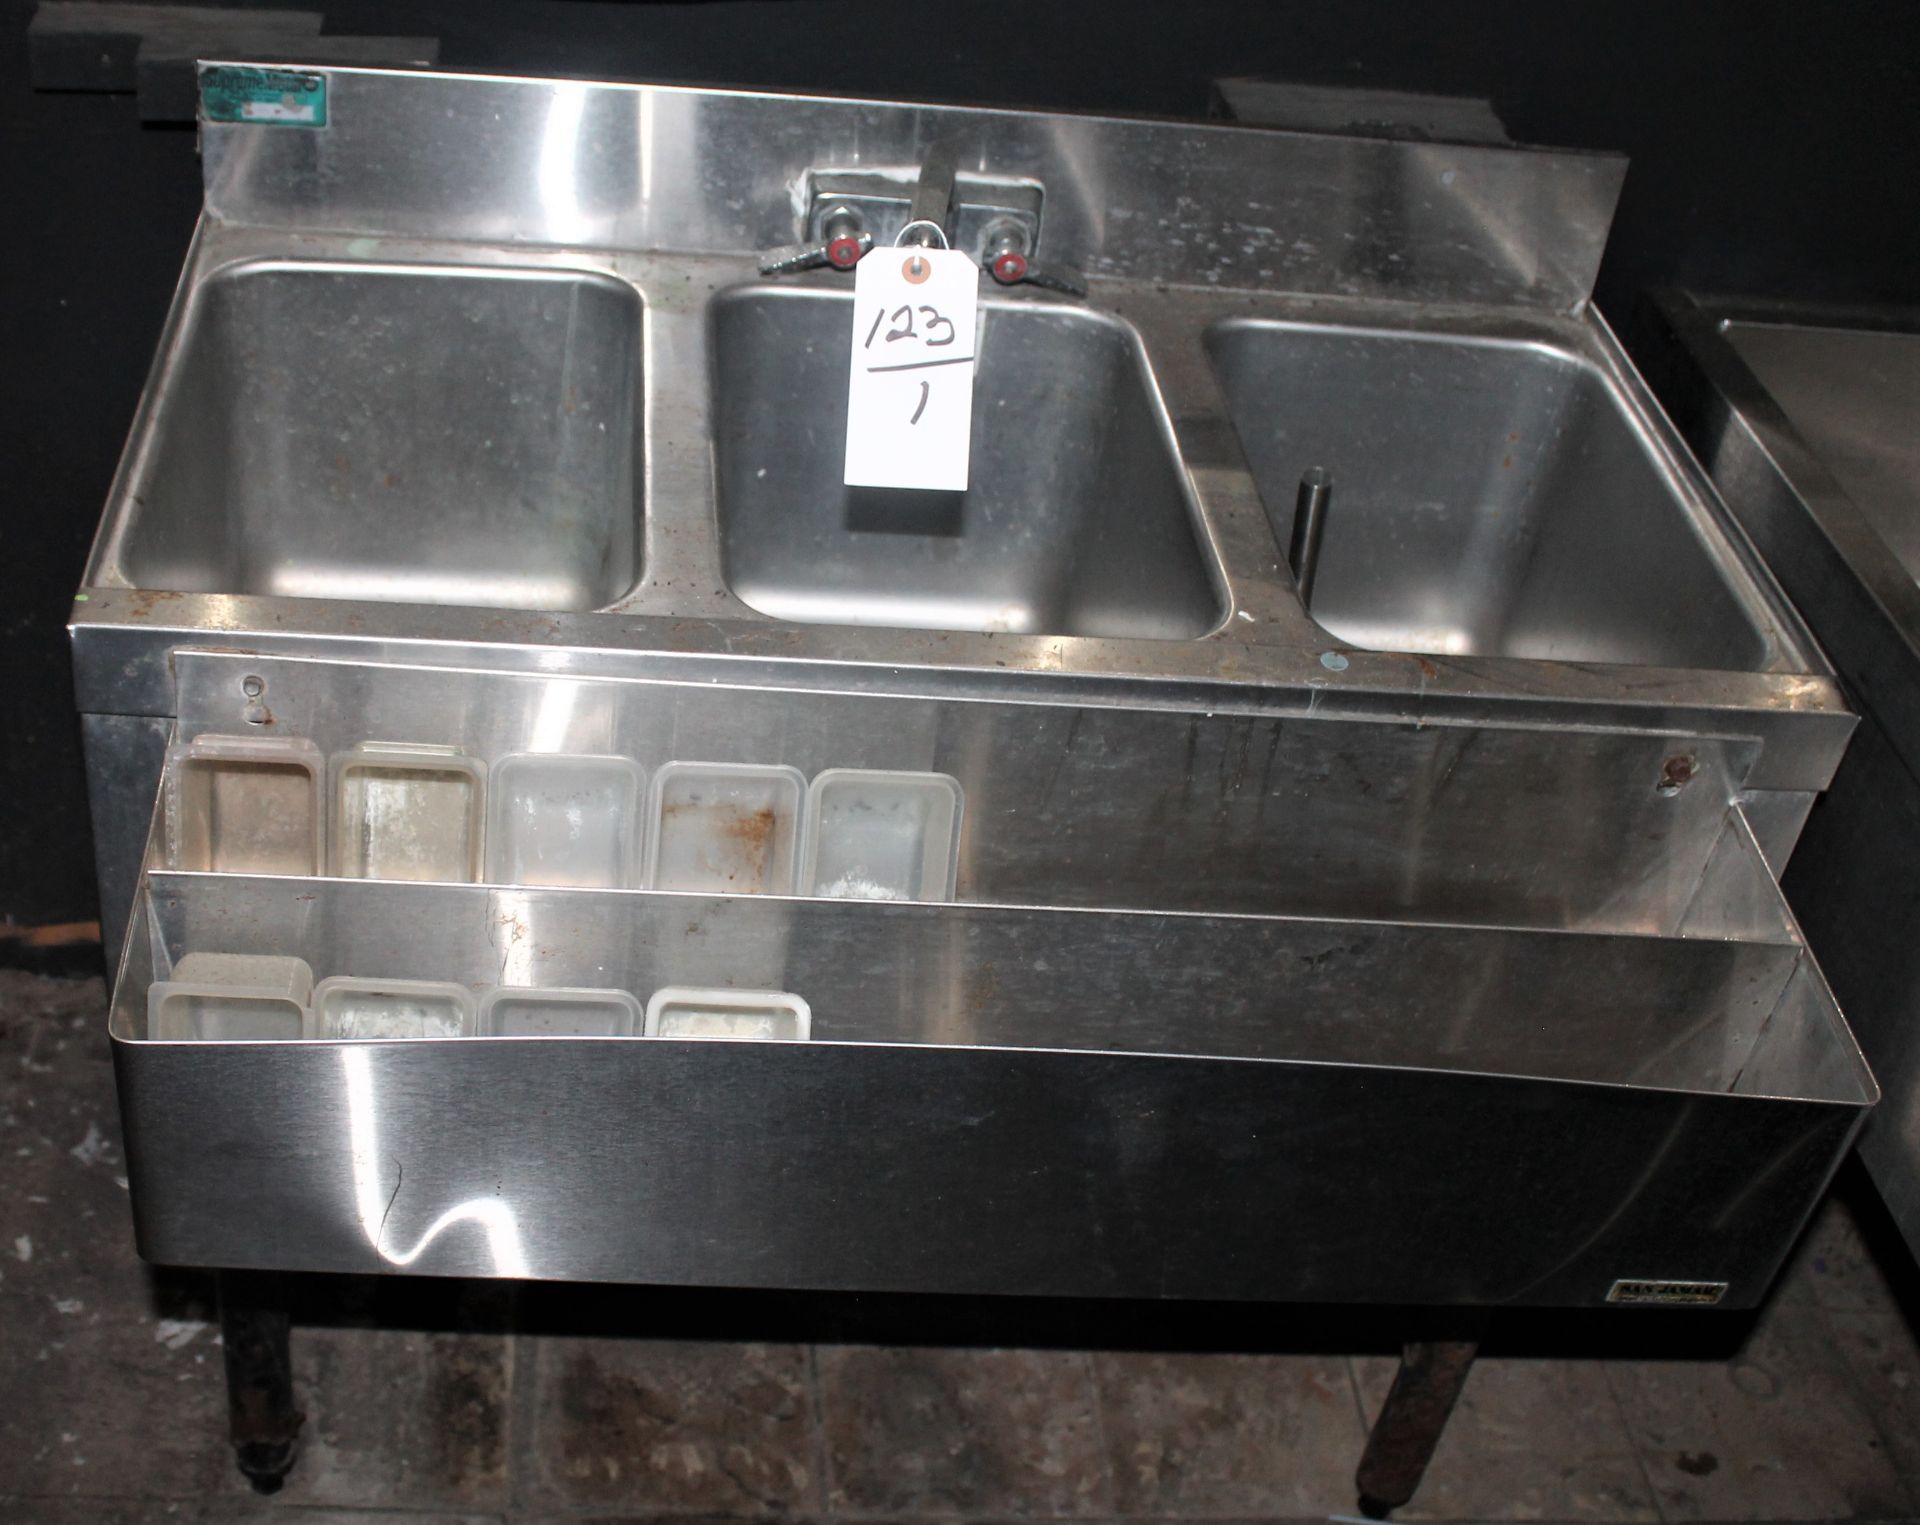 3 Compartment Sink w Speed Rack